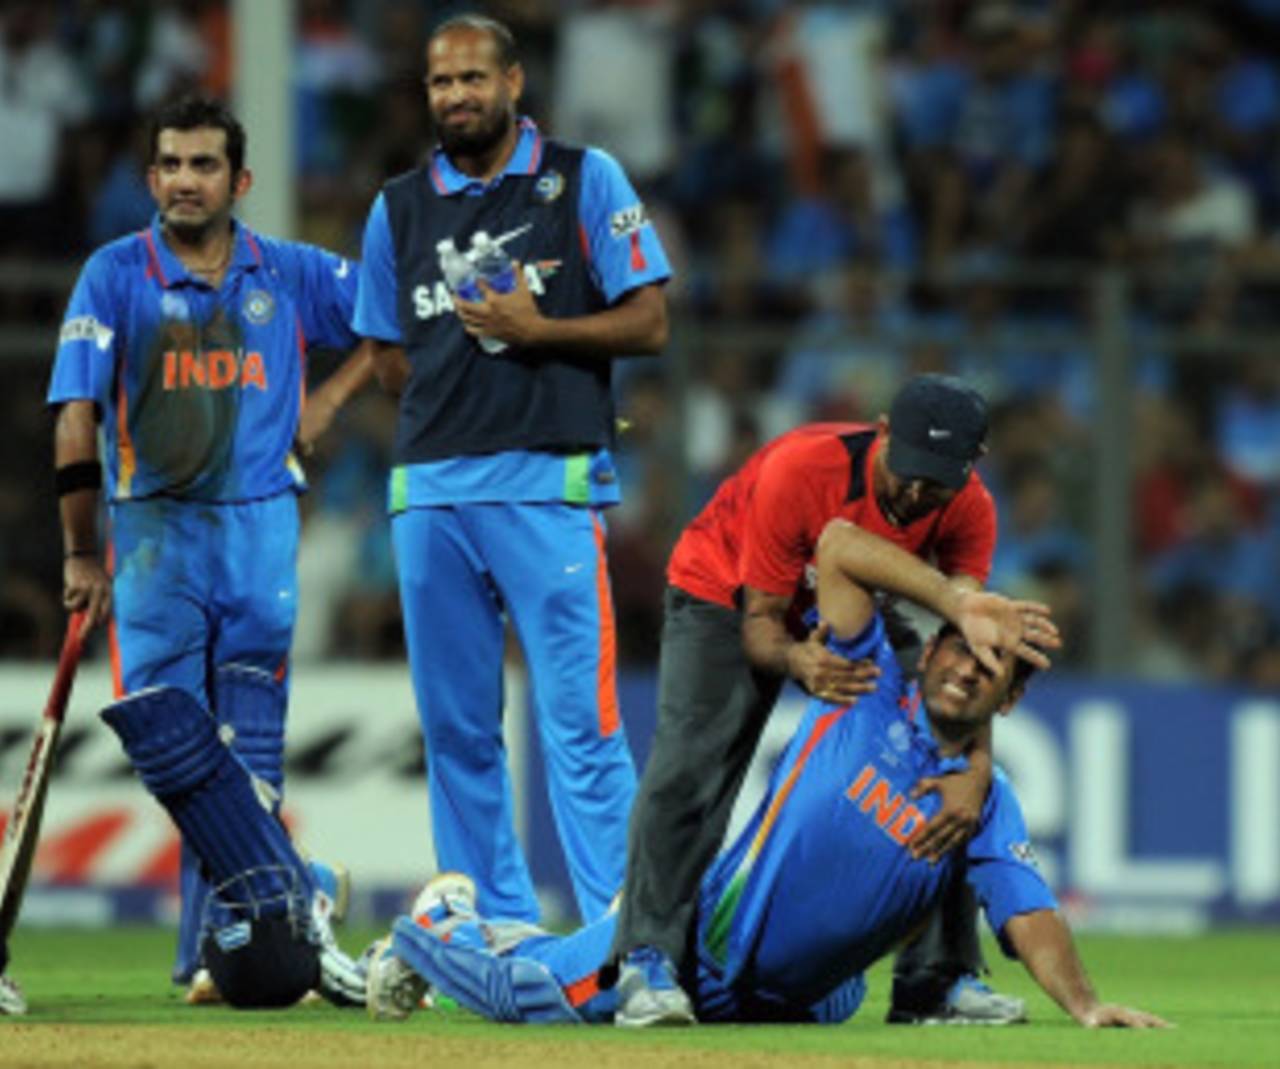 MS Dhoni is attended to after feeling some pain in his side, India v Sri Lanka, final, World Cup 2011, Mumbai, April 2, 2011